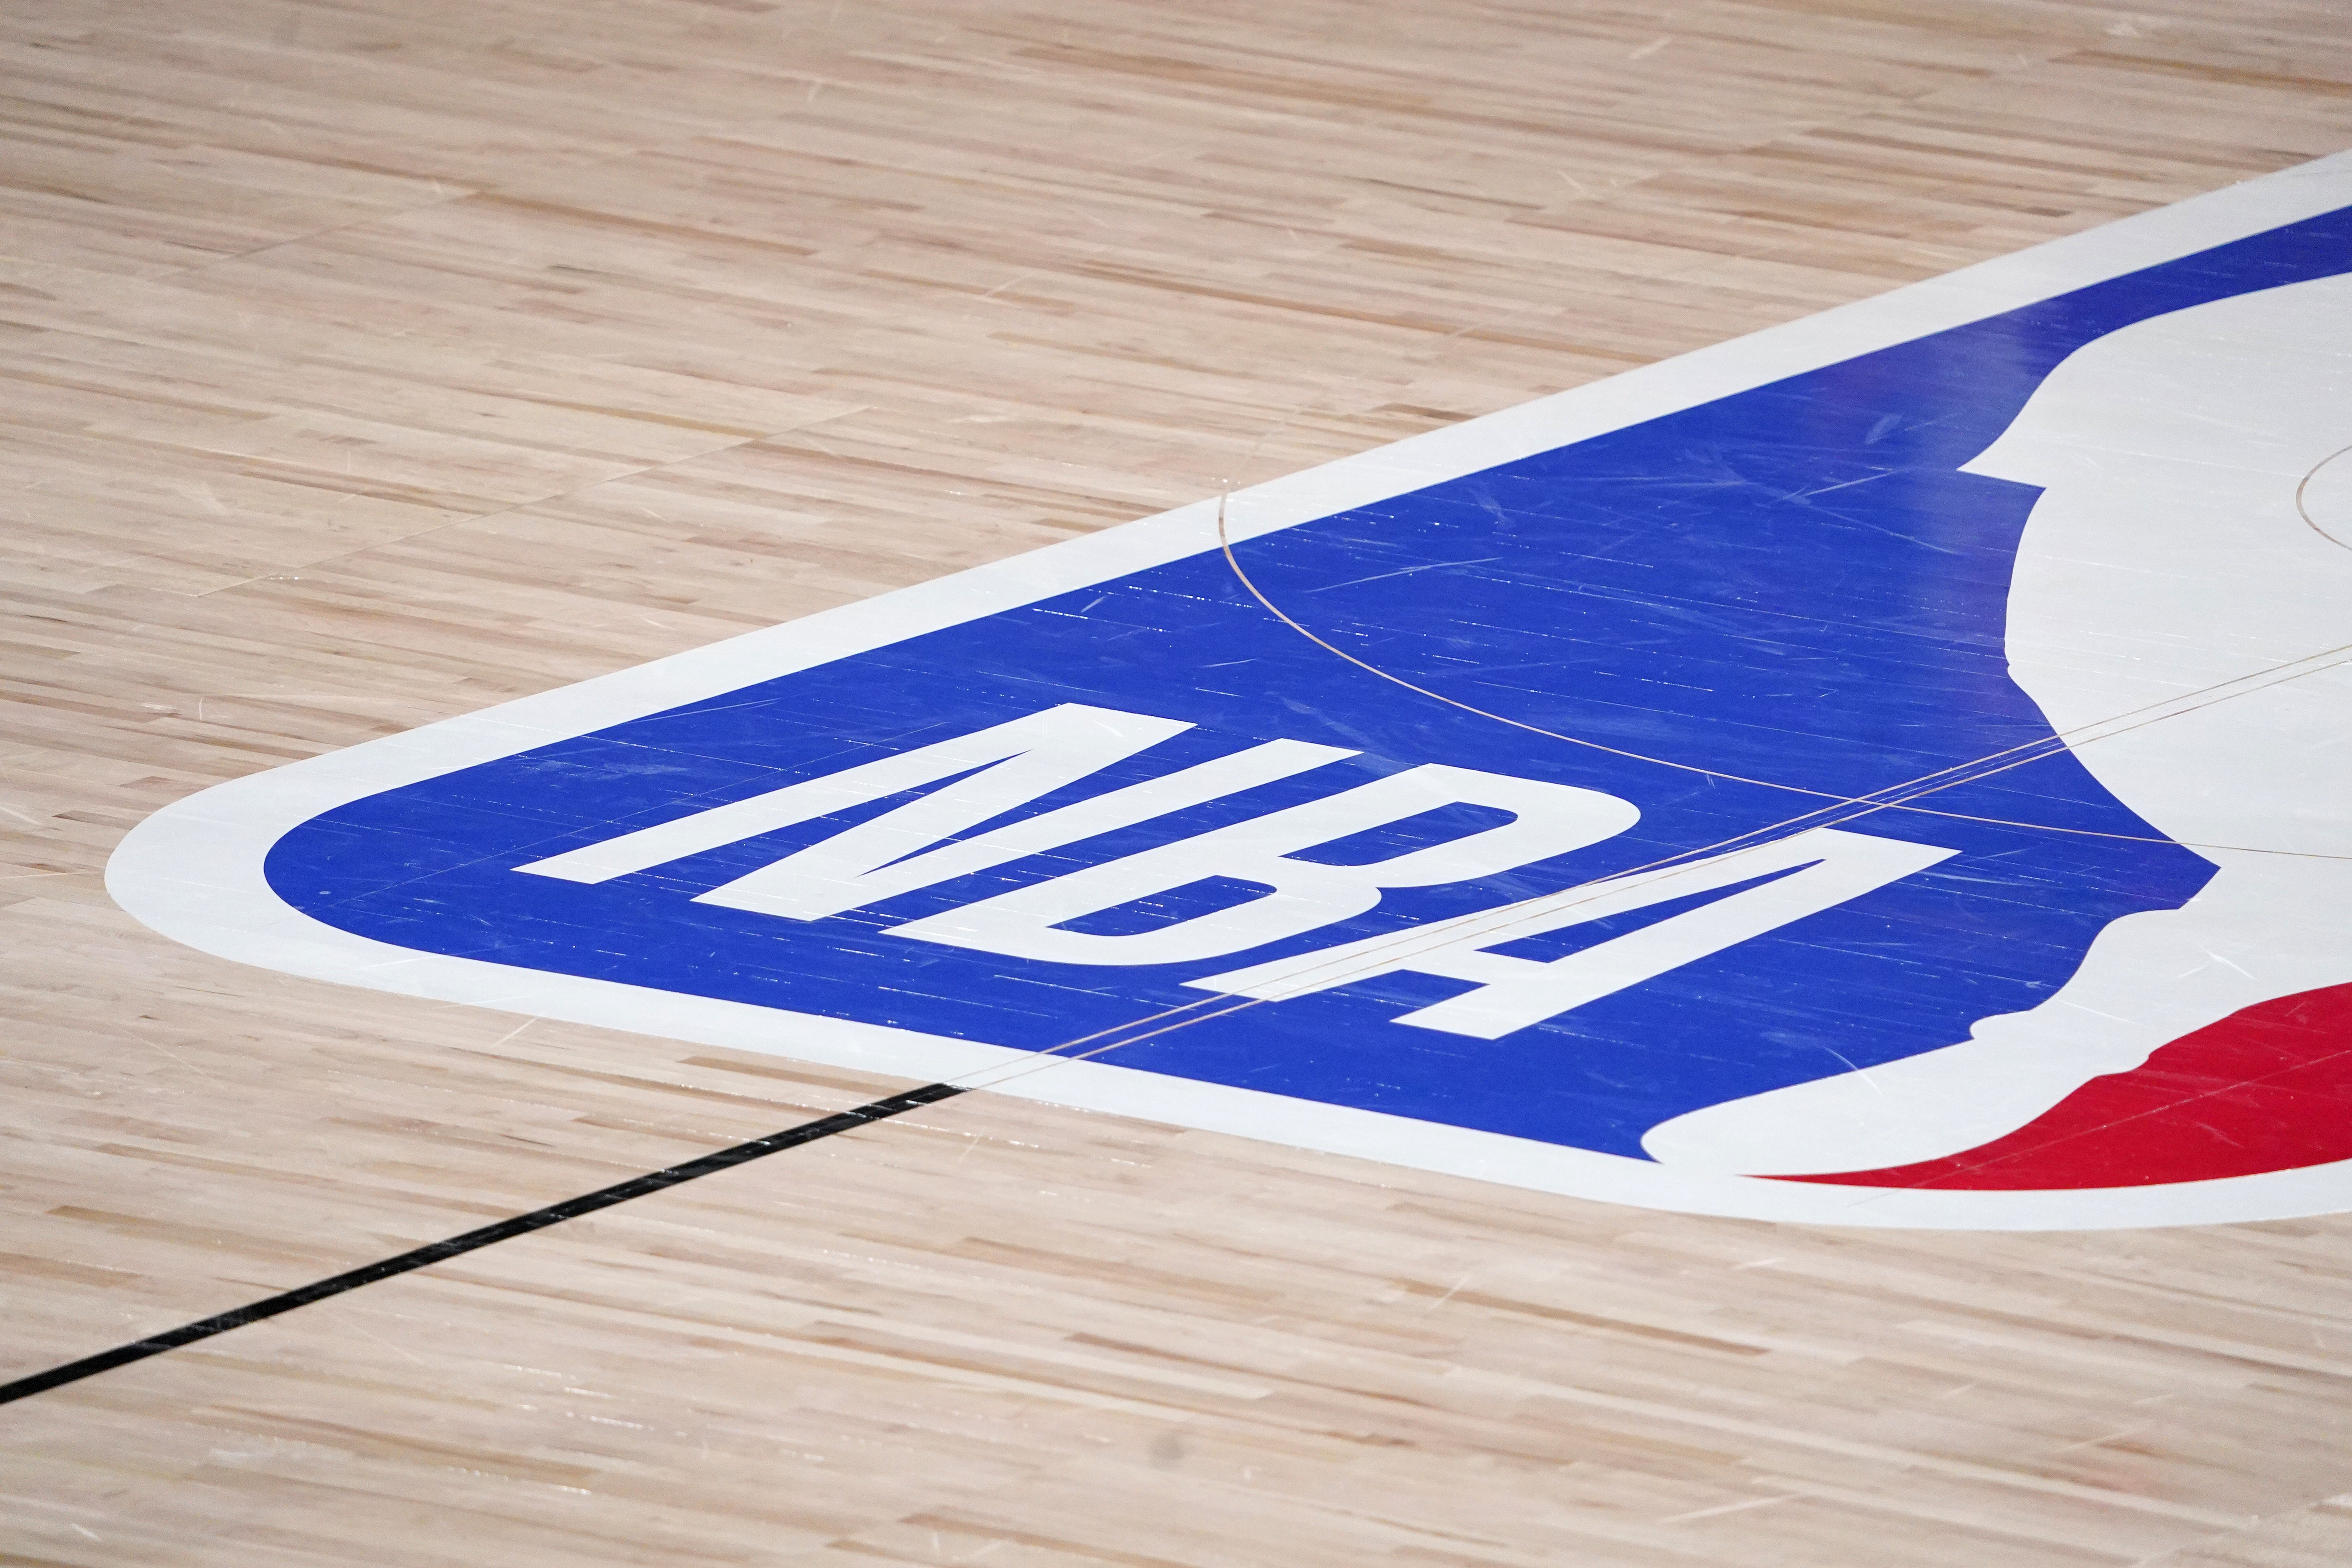 Nba Conference Finals Schedule 2022 Nba Schedule 2022: Regular Season, Playoffs, Finals And Key Dates  Reportedly Revealed | Bleacher Report | Latest News, Videos And Highlights